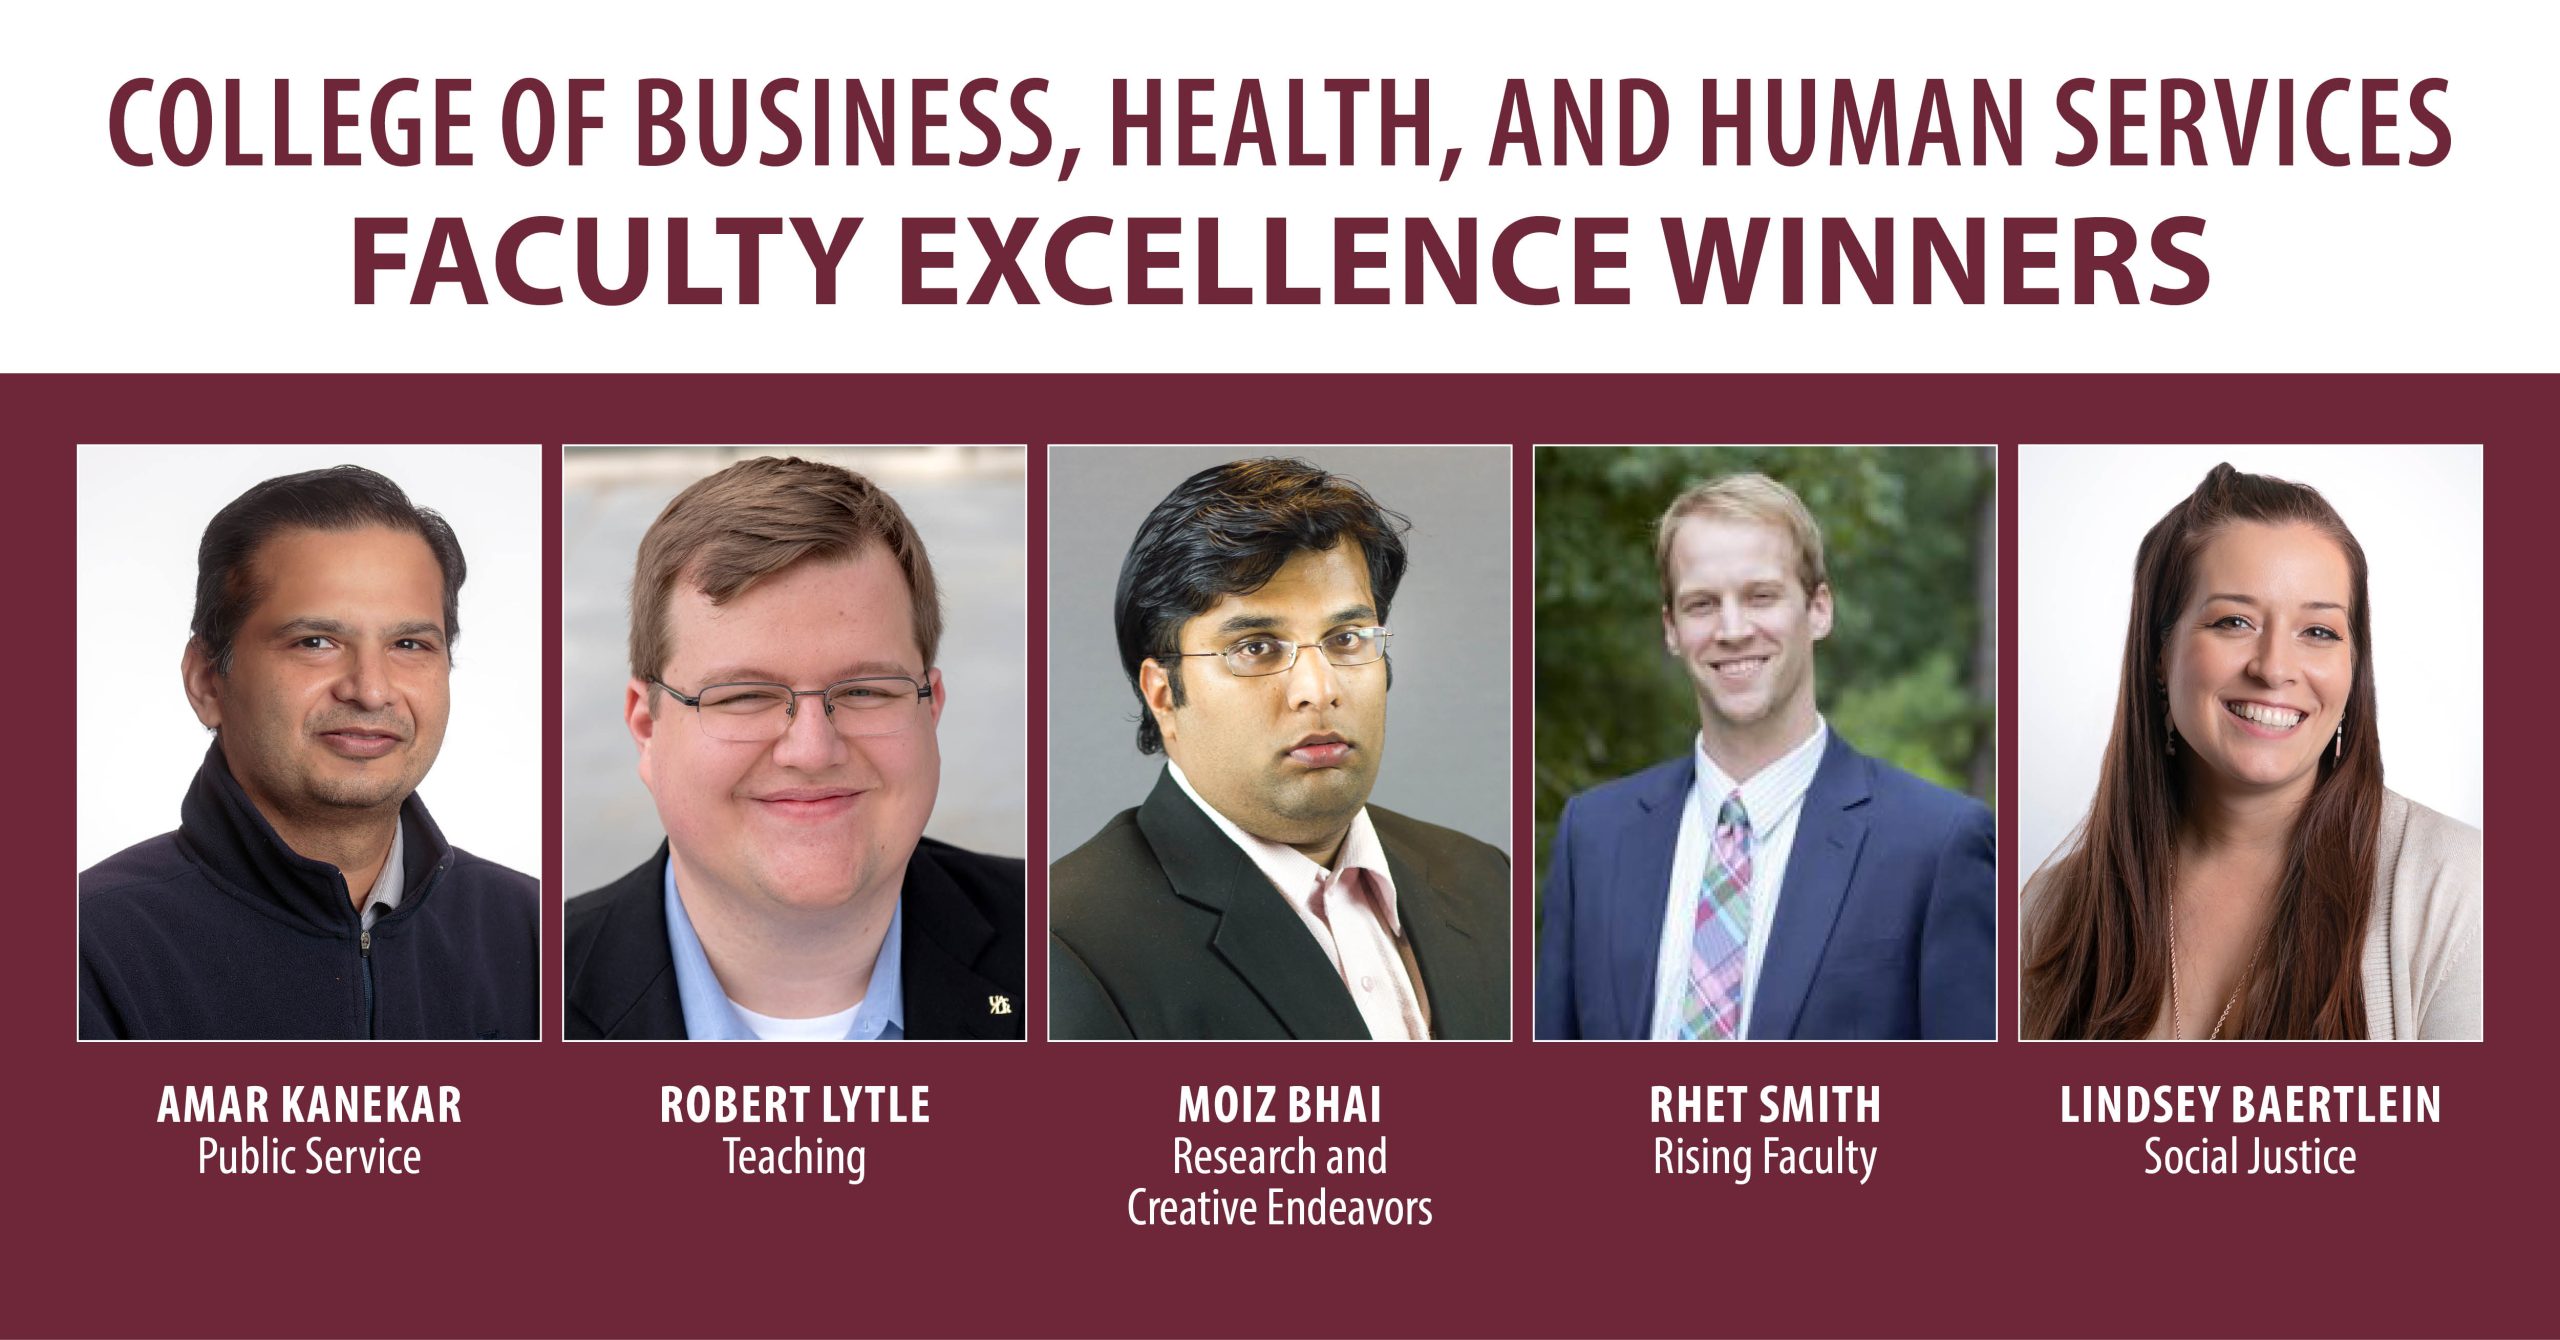 The UA Little Rock College of Business, Health, and Human Services has honored Lindsey Baertlein, Moiz Bhai, Amar Kanekar, Robert Lytle, and Rhet Smith as its top professors of 2023.